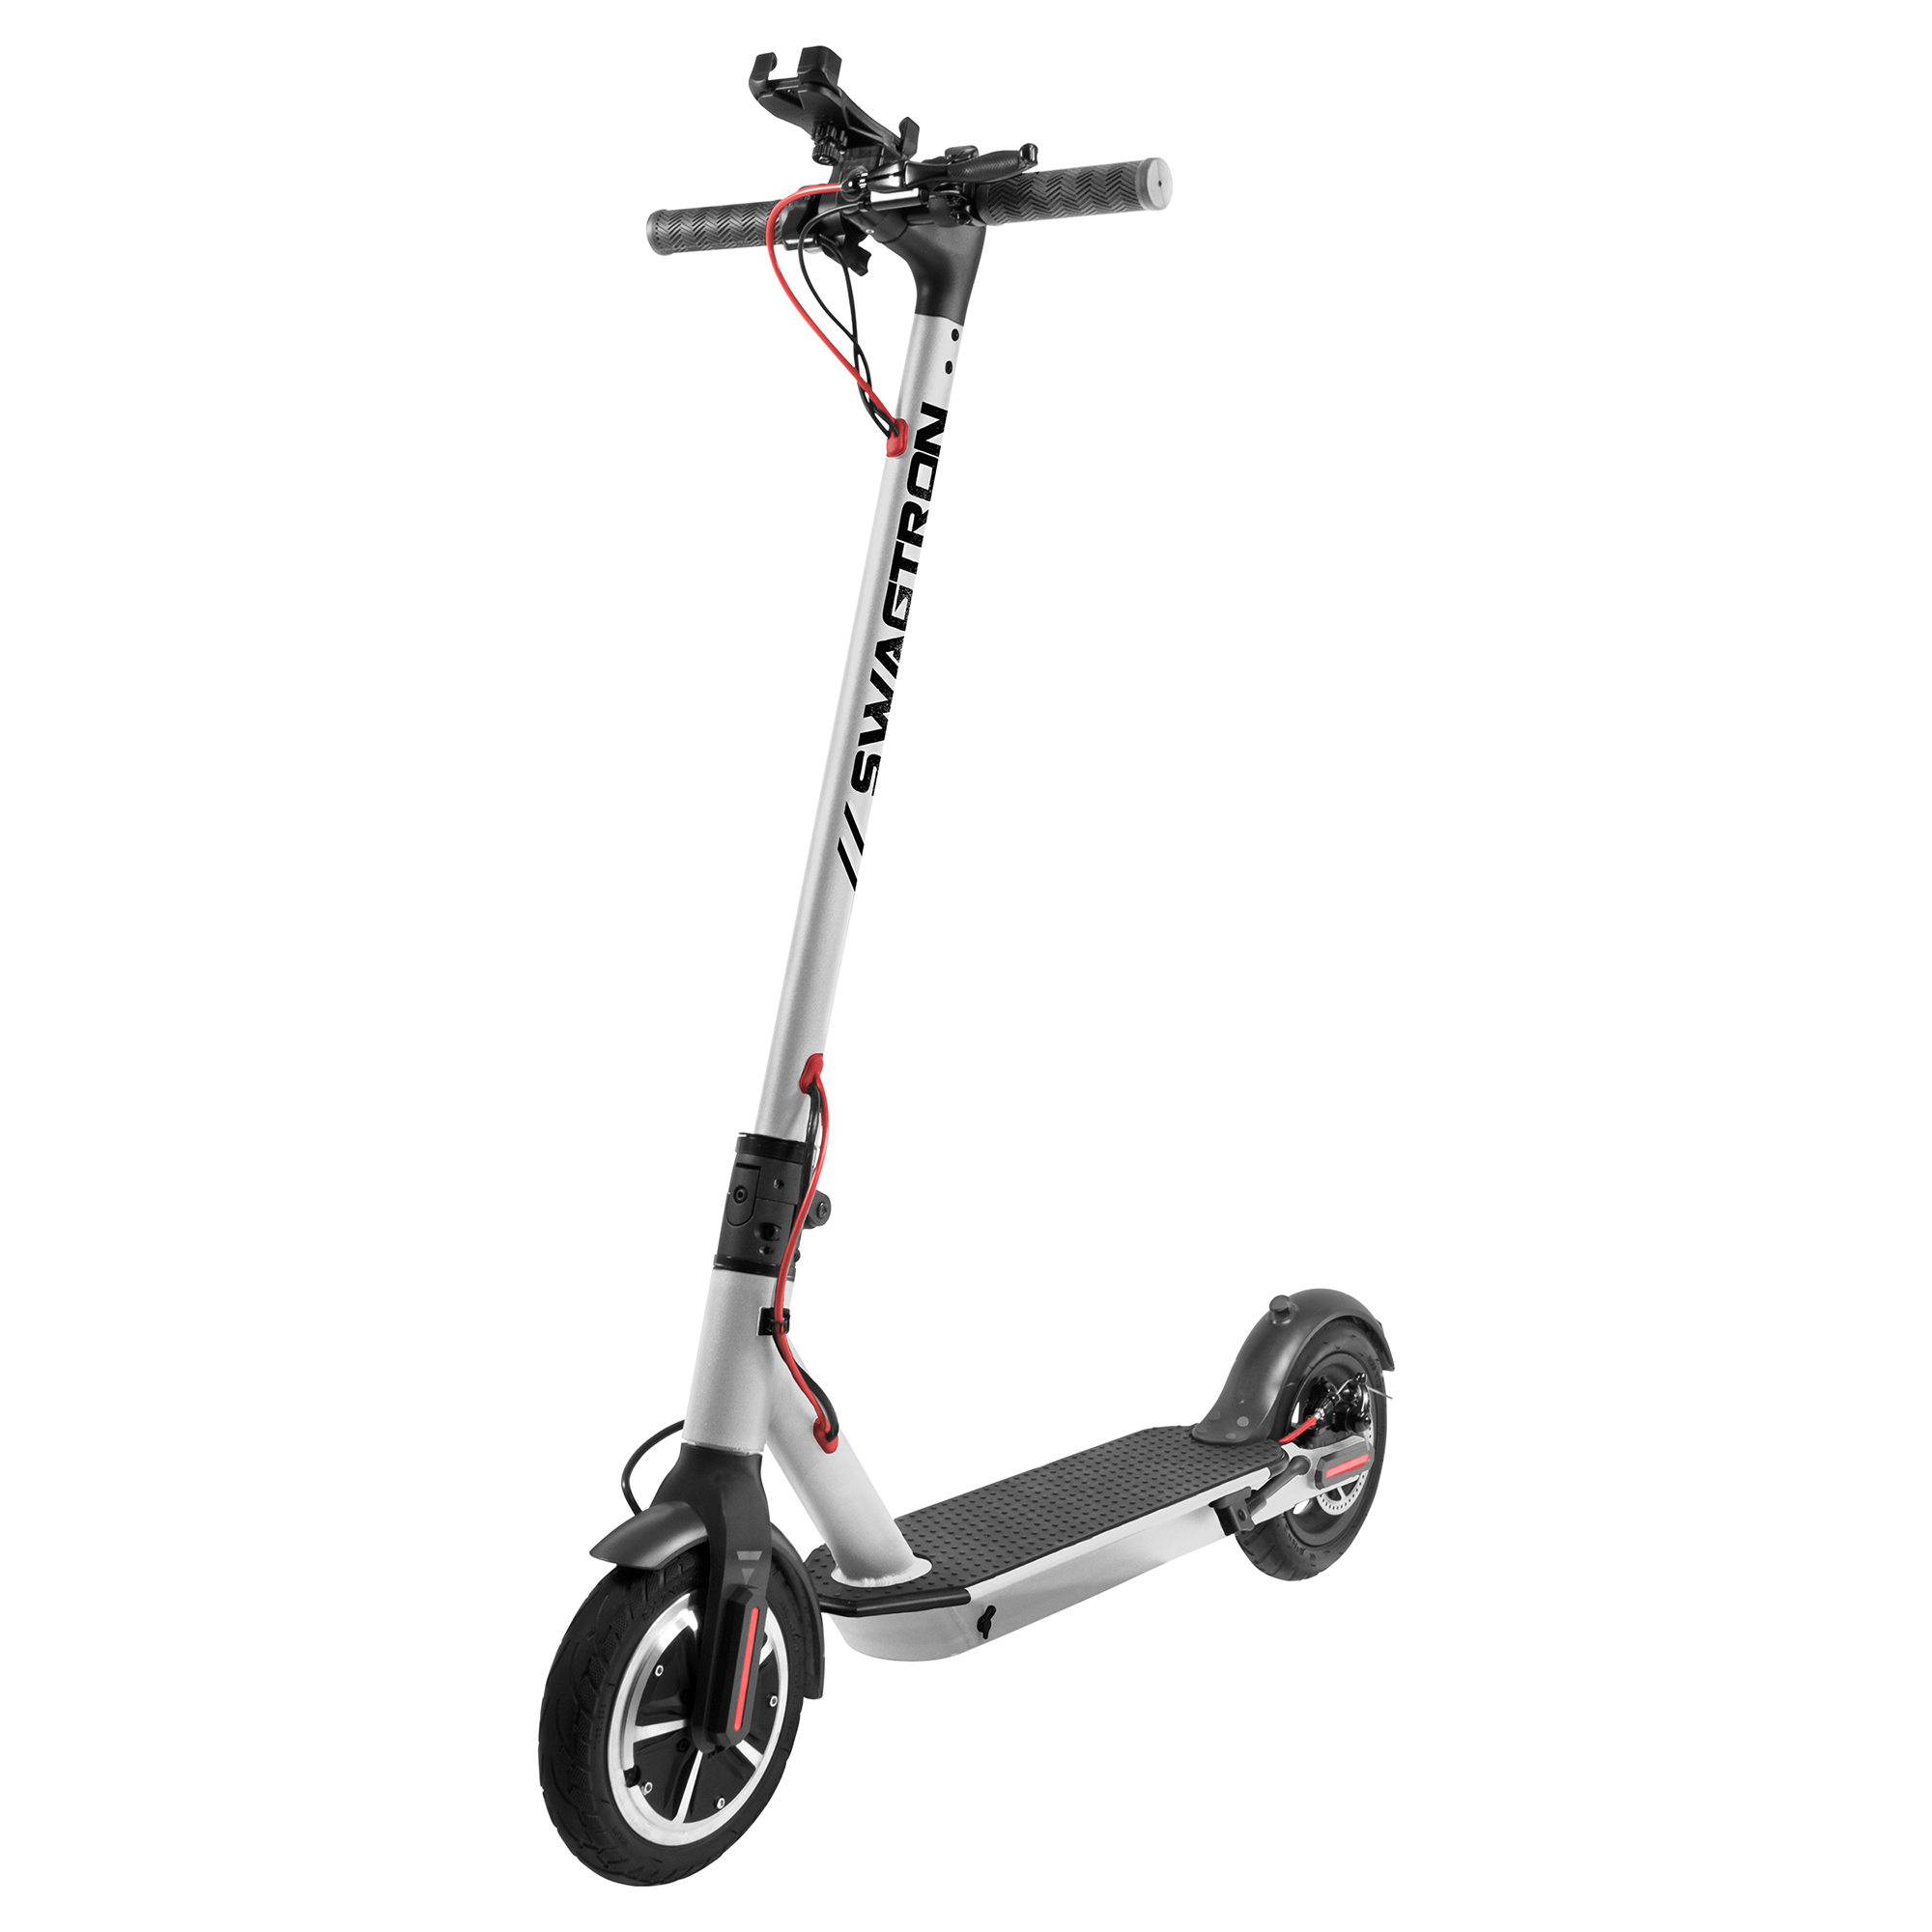 Known for light electric vehicles like the Swagger 5 Elite electric scooter, SWAGTRON opened a marketing office in Denver last June.